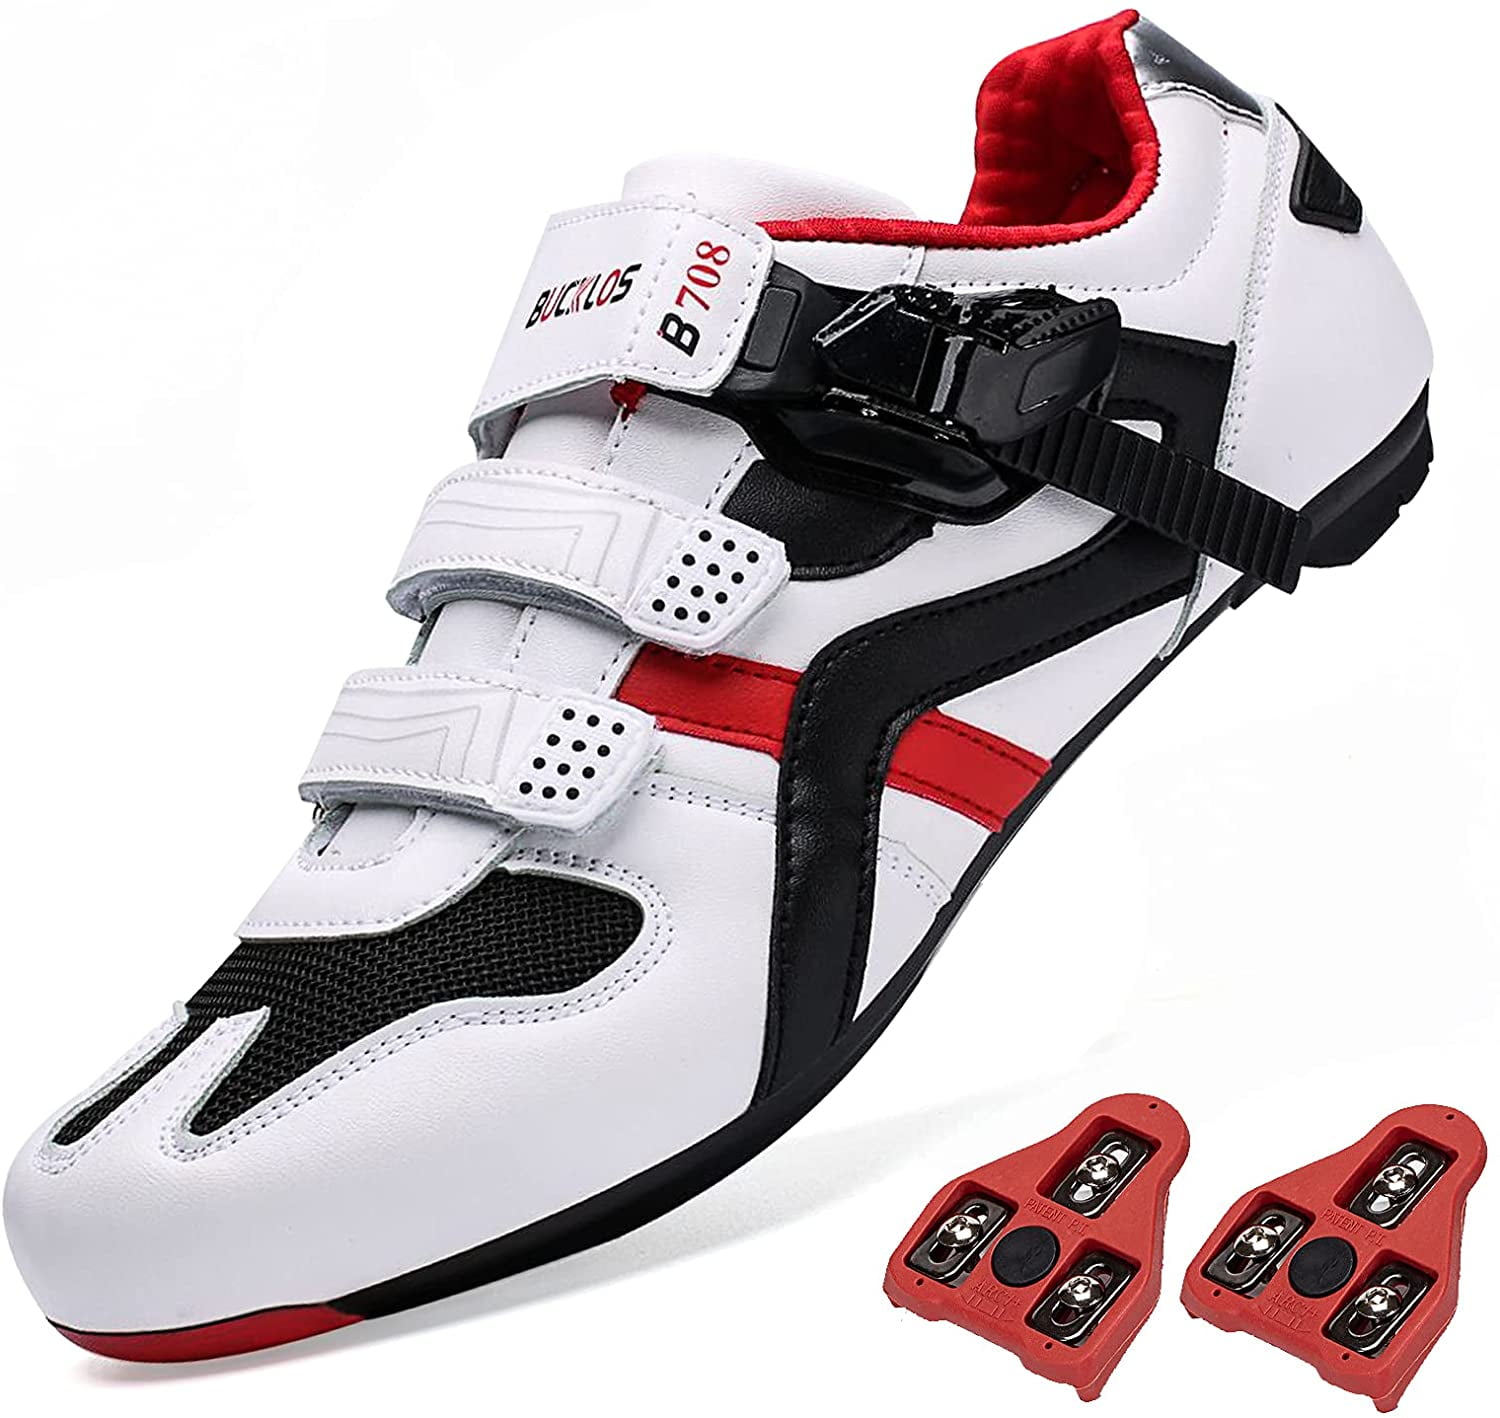 Mens Cycling Shoes Compatible with Indoor Peloton Mountain Road Bike Shoes Peleton SPD Shoes for Men Delta Cleats Clip to Lock Shimano Pedal 